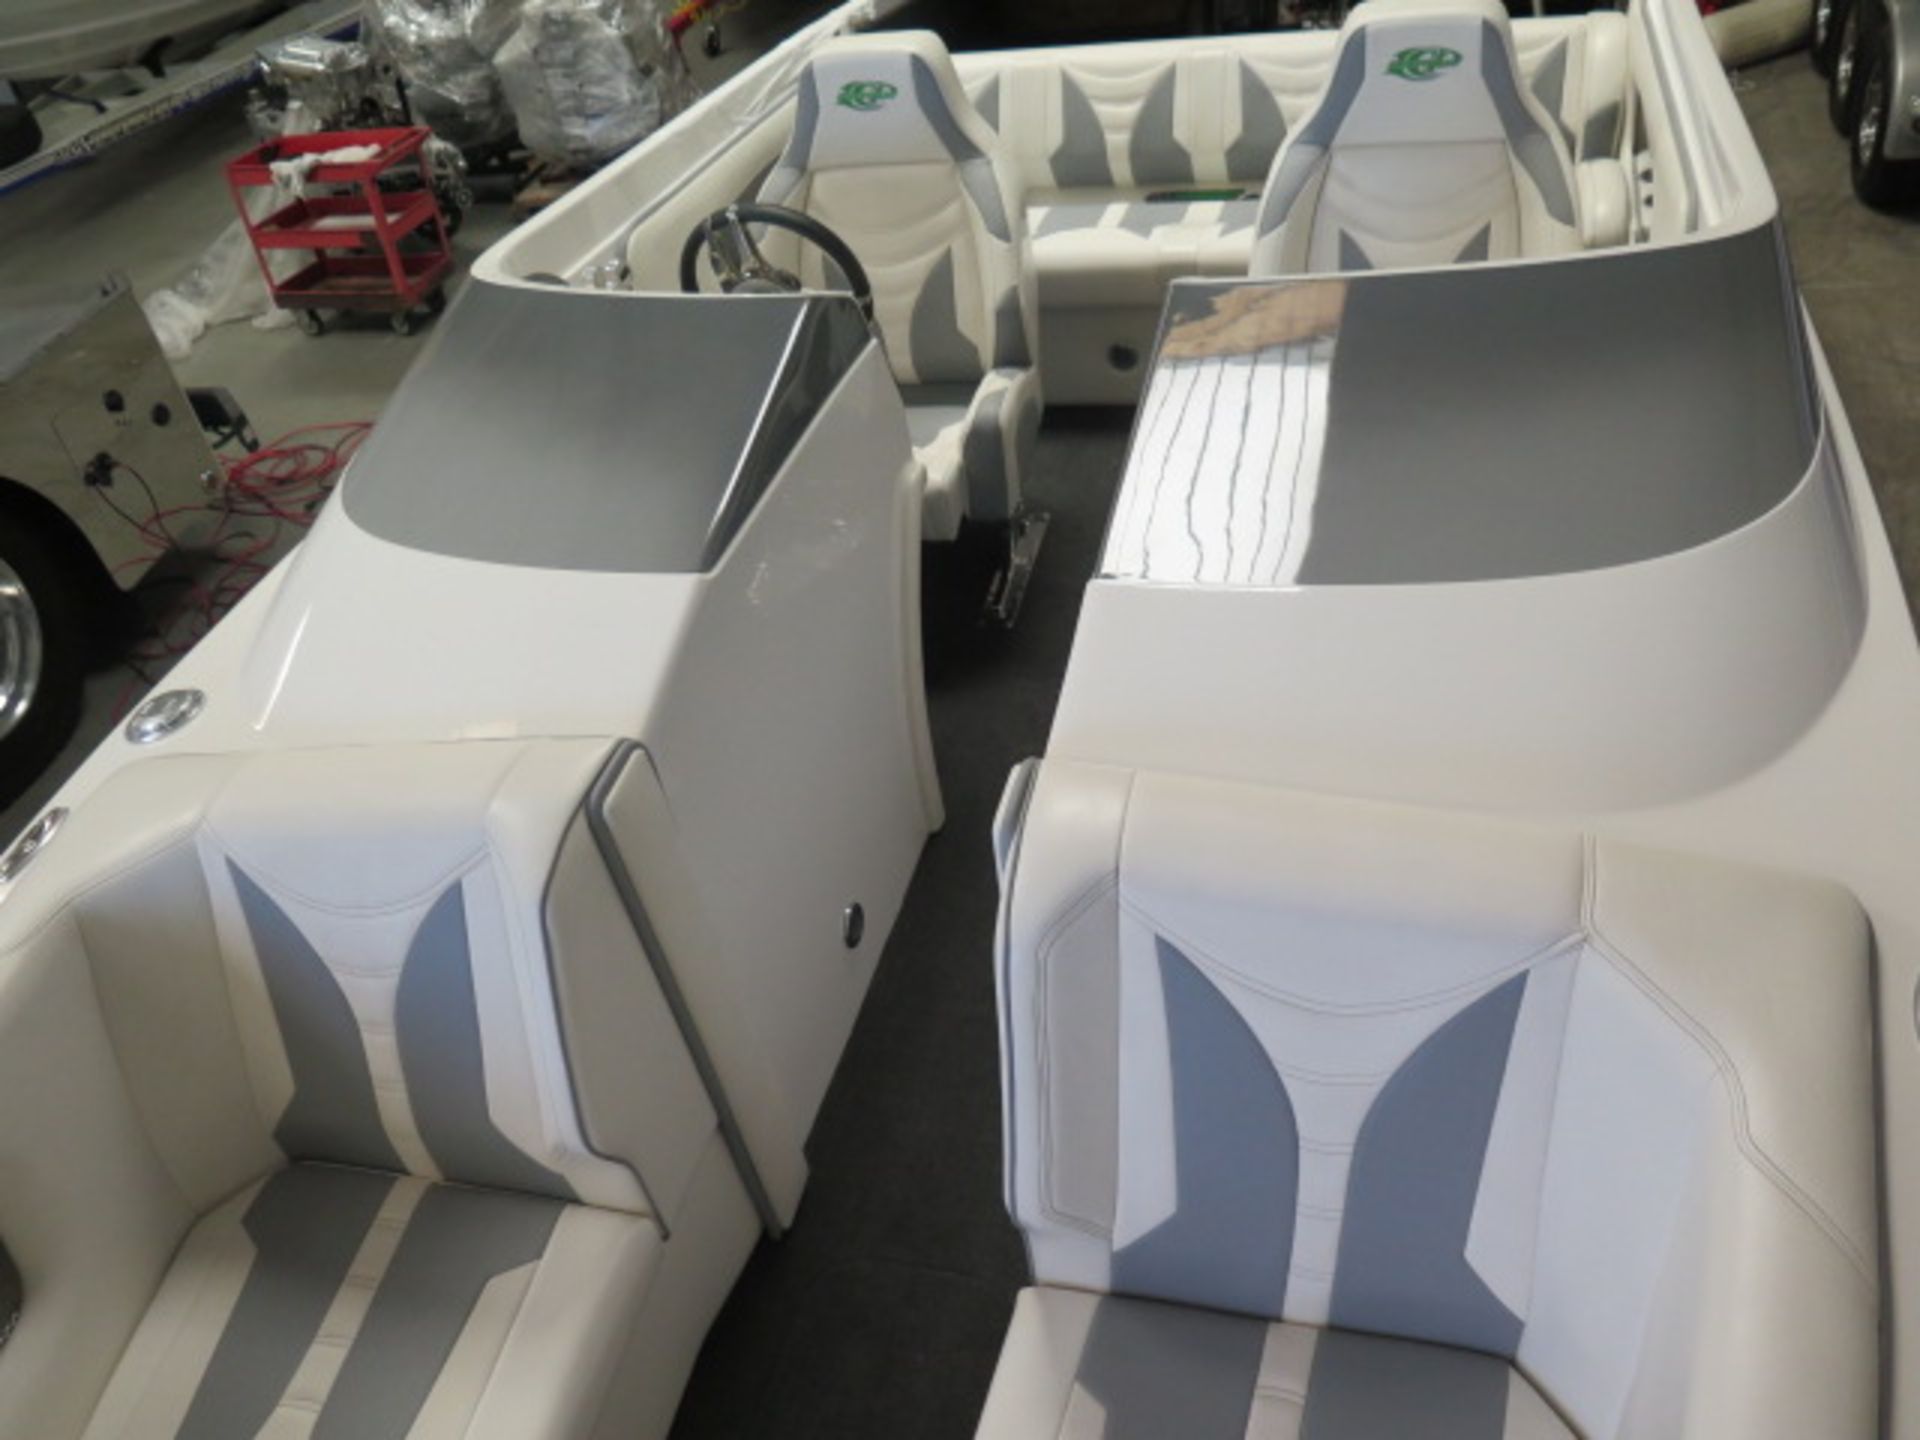 2020 Laveycraft 24' V-Bottom Open Bow Boat w/ Custon Martinez Interior, Boostpower 675Hp, SOLD AS IS - Image 16 of 40